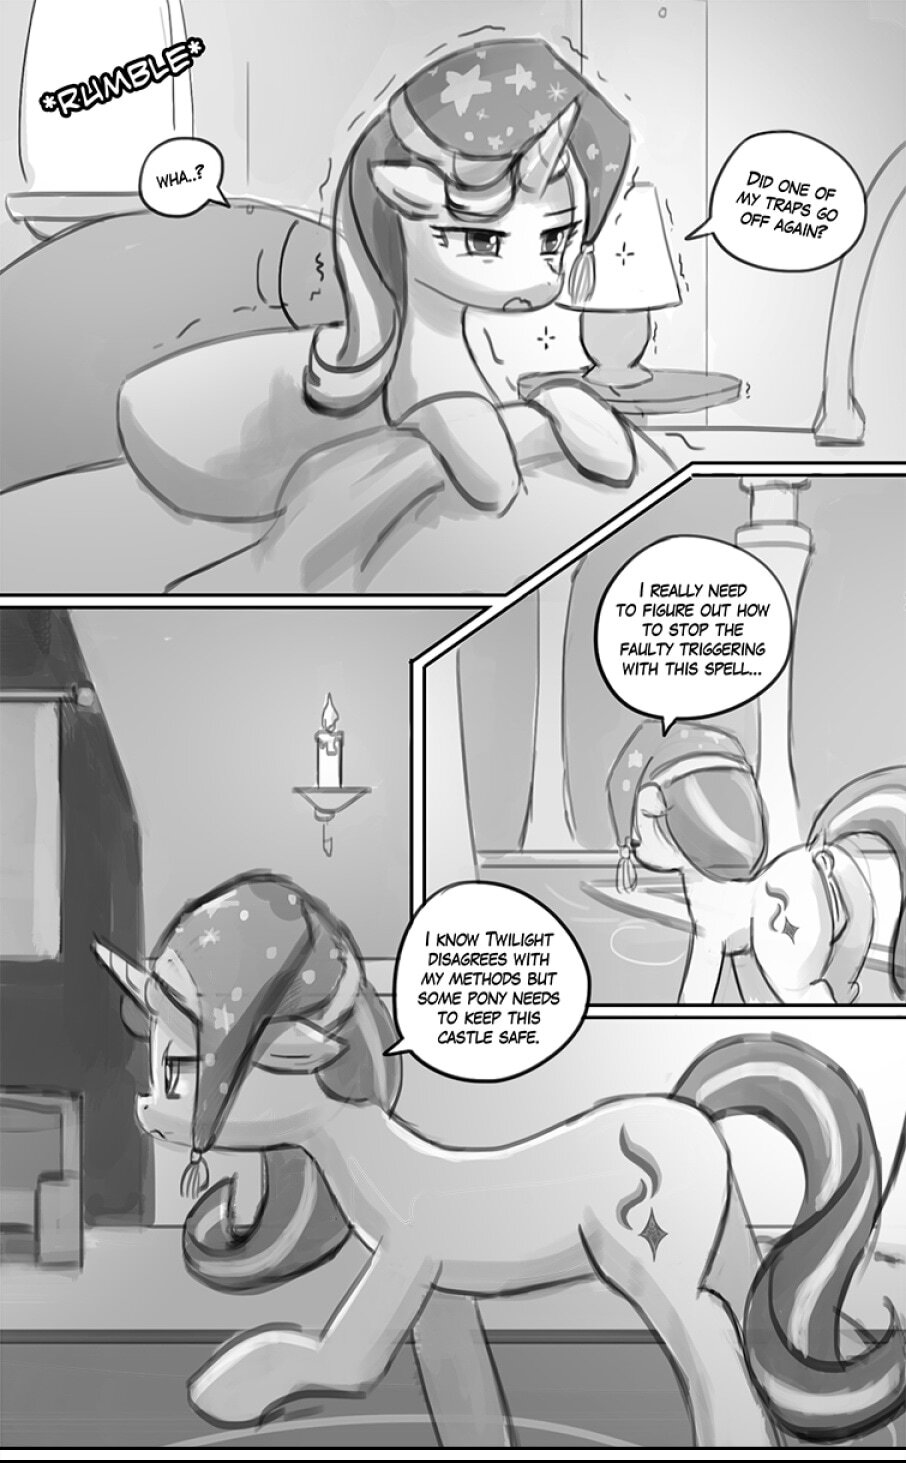 Homesick Part 2: Hearth's Warming Eve - Page 2